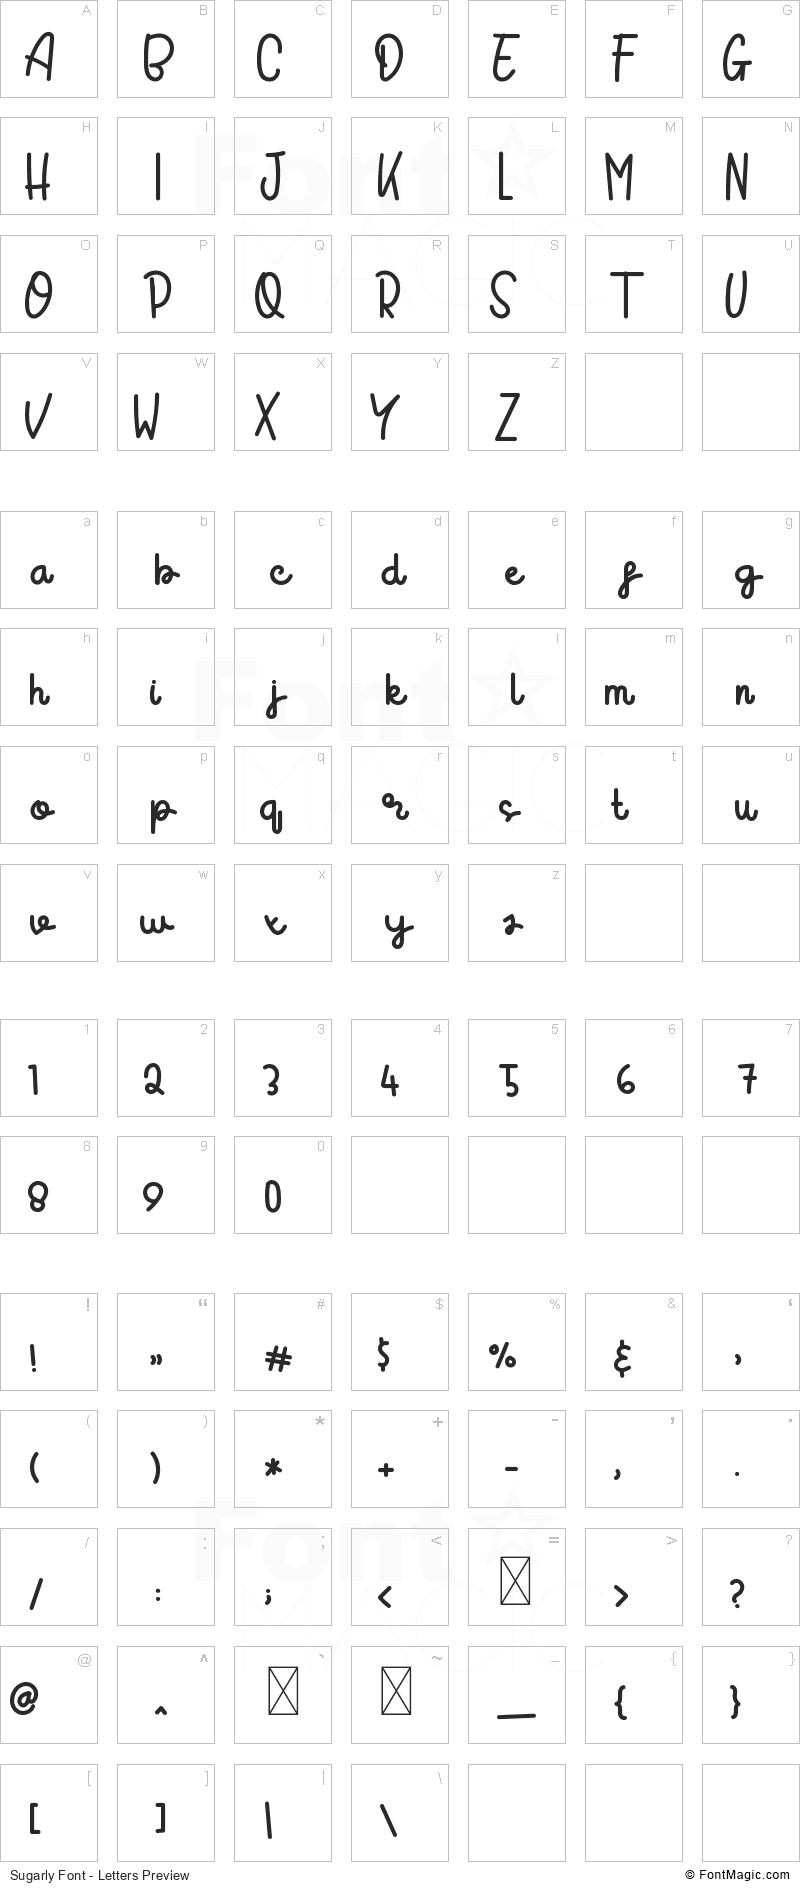 Sugarly Font - All Latters Preview Chart